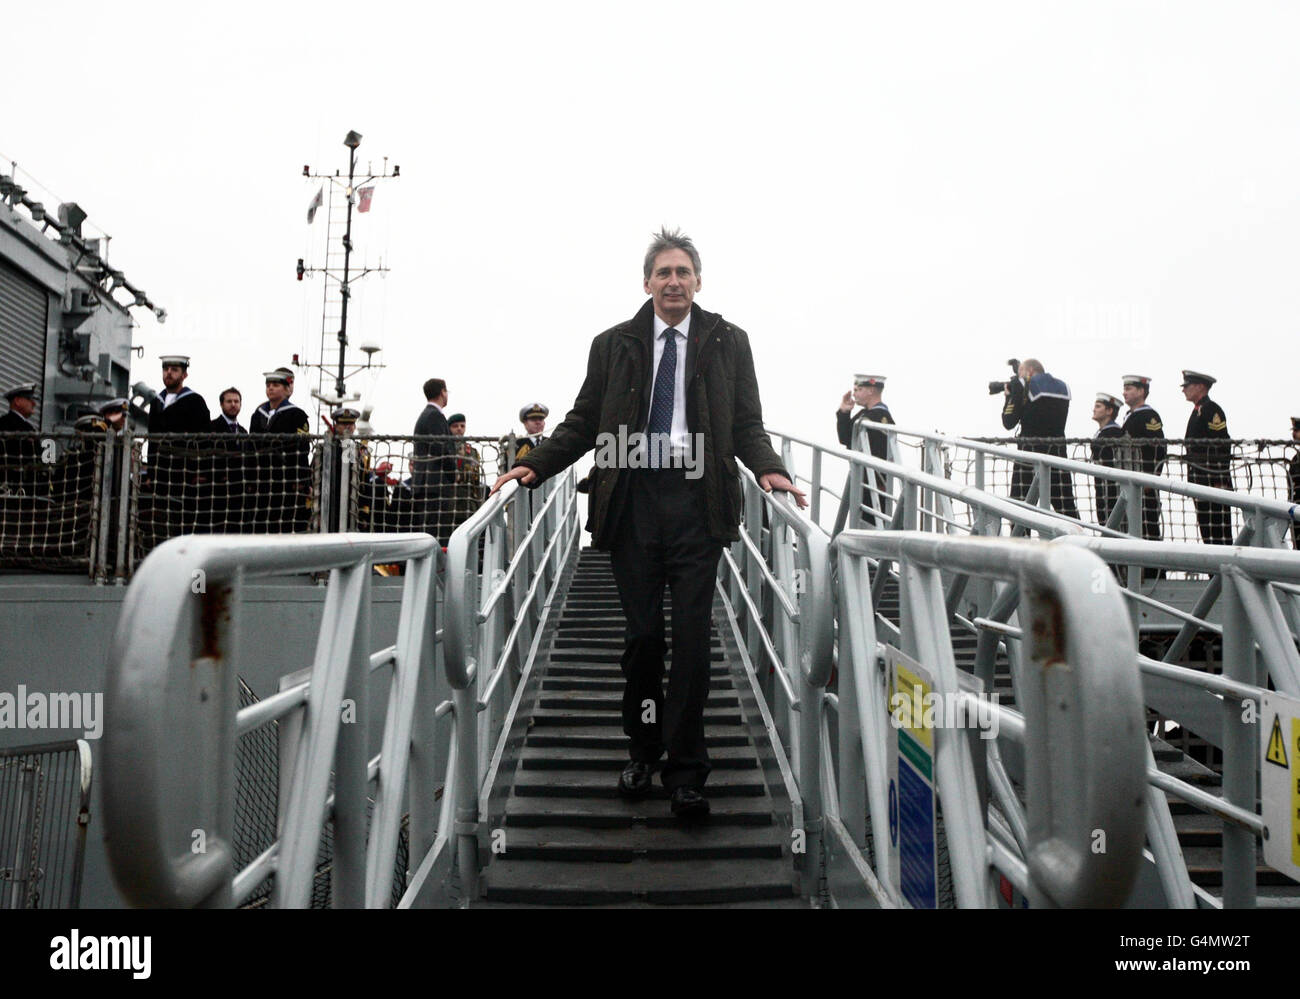 Defence Secretary Philip Hammond disembarks from HMS Liverpool as it returned to its base of Portsmouth, Hampshire, after Mr Hammond congratulated the Royal Navy for its 'momentous' role in helping defeat Gaddafi's troops in Libya. Stock Photo